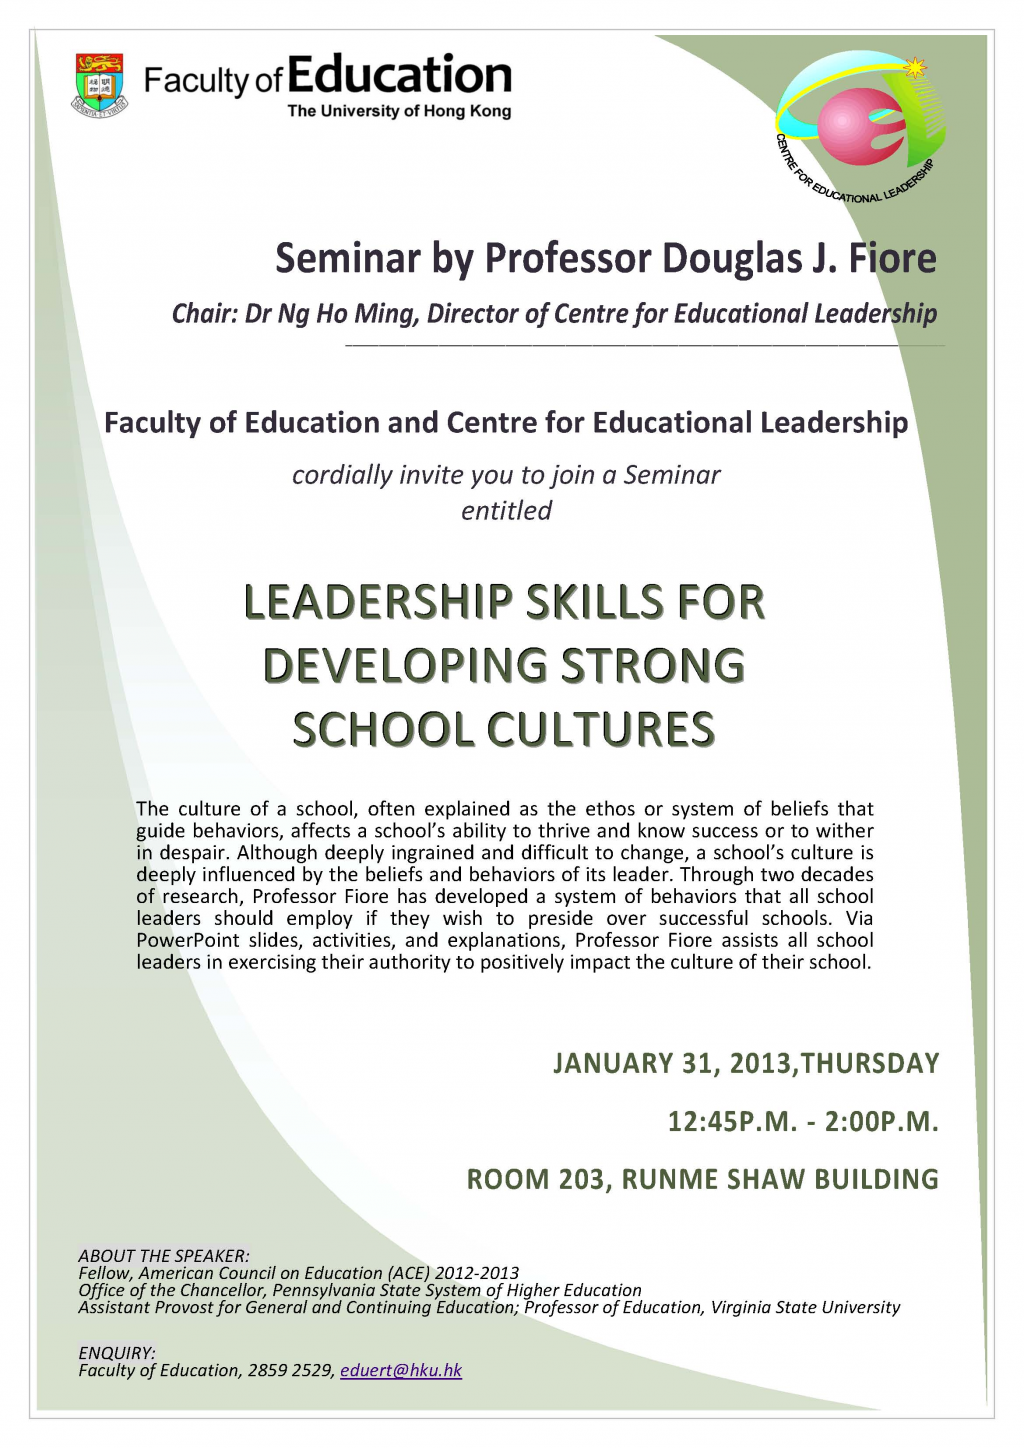 Seminar on Leadership Skills for Developing Strong School Cultures